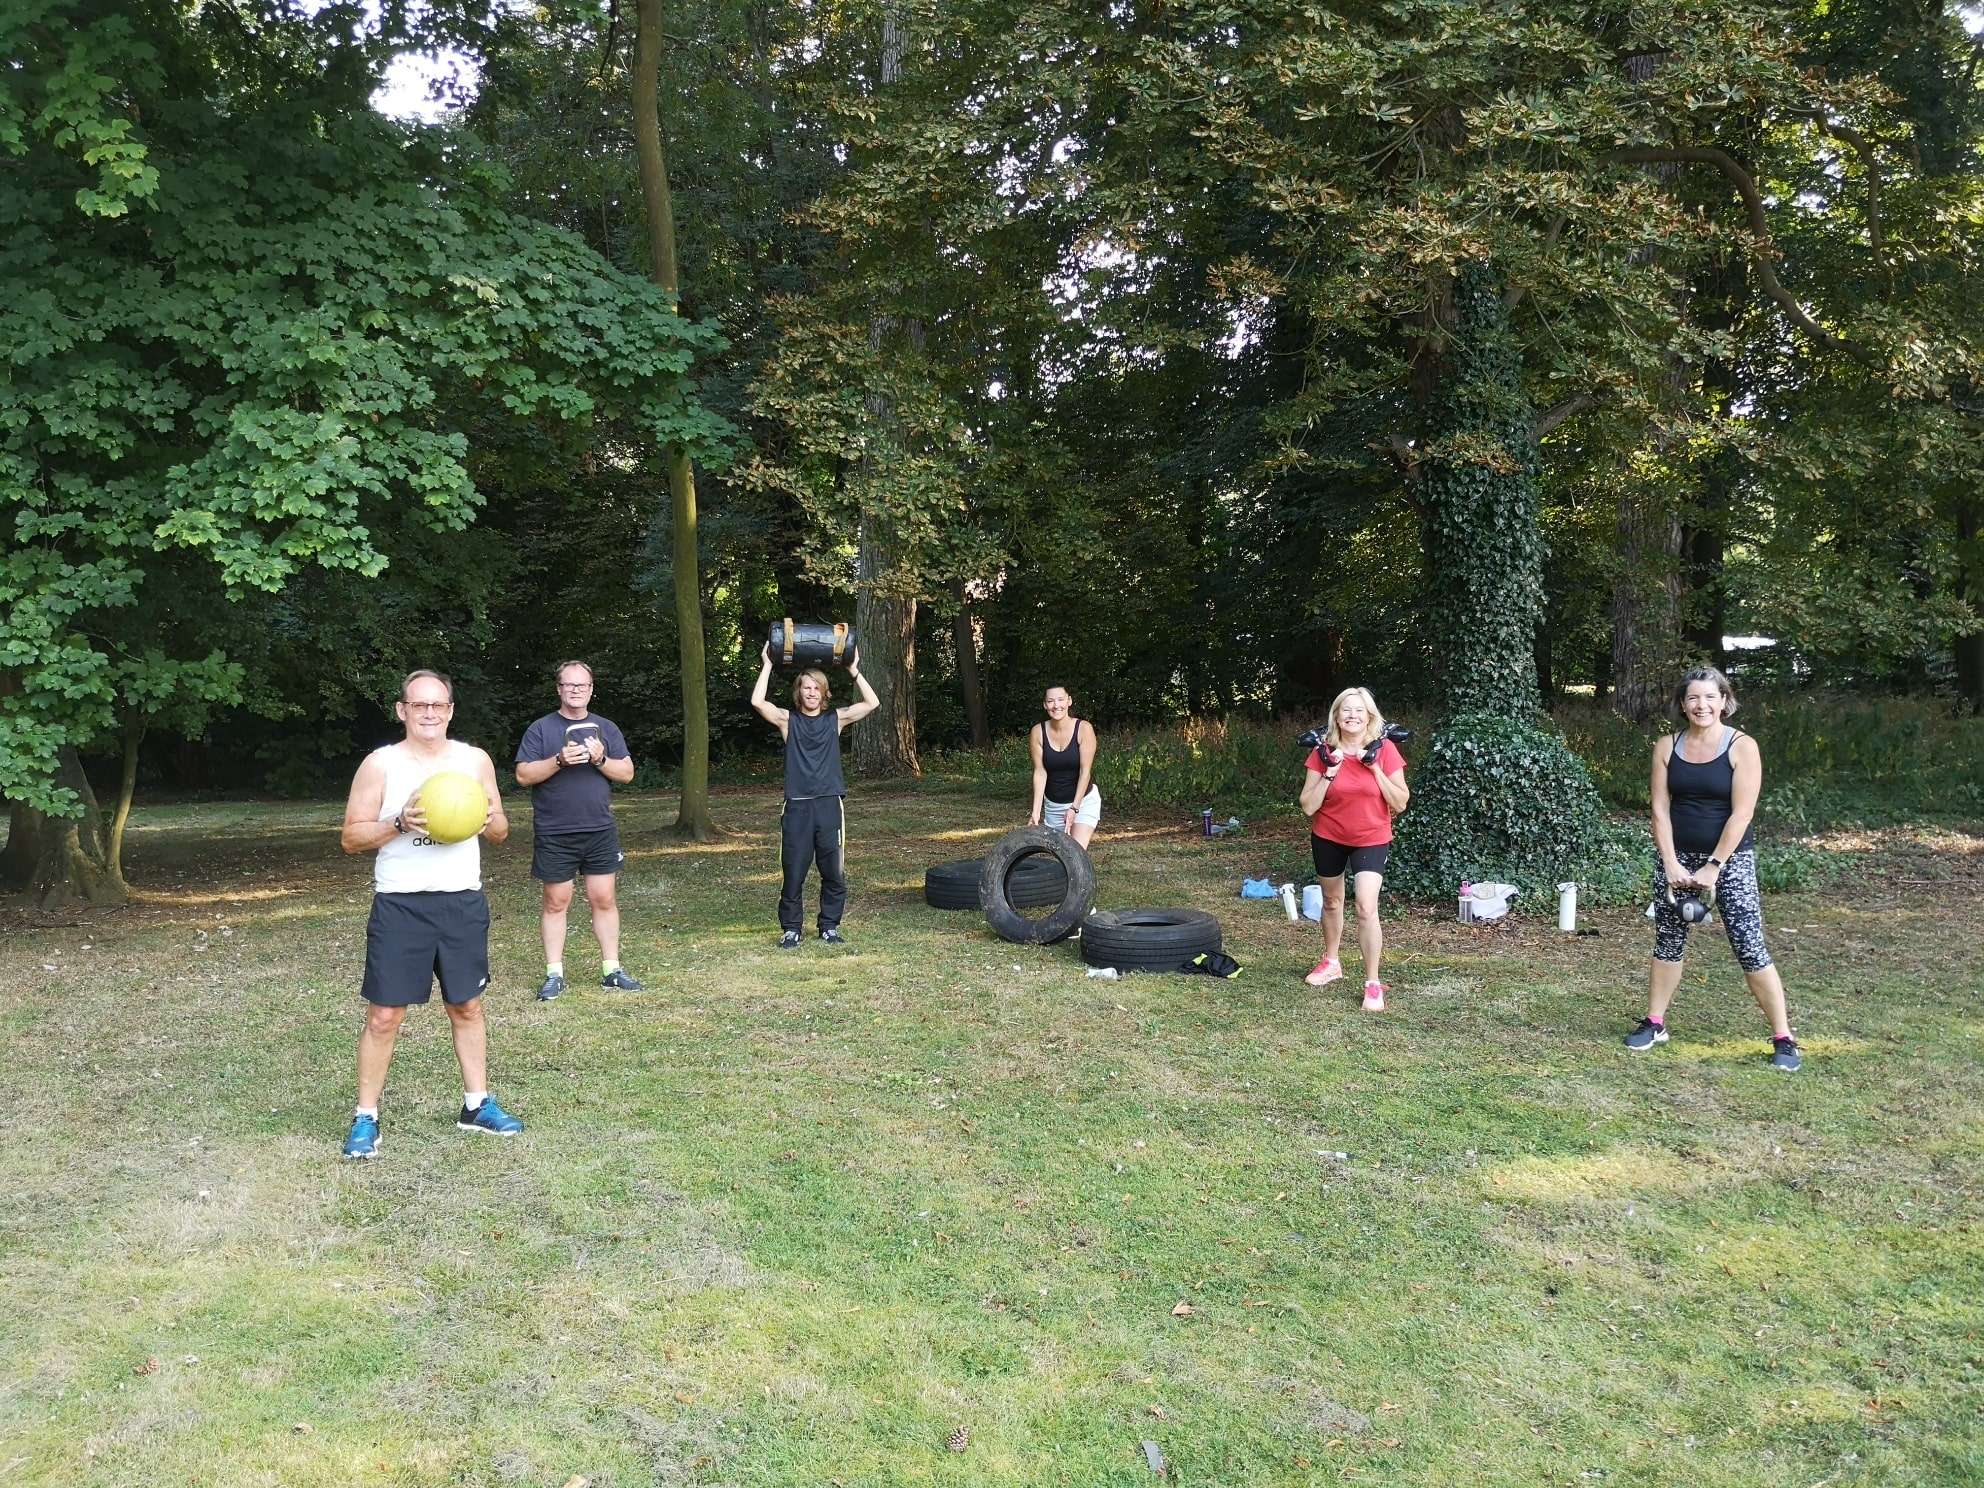 OUTDOOR FITNESS FOR BANNATYNE BURY ST EDMUNDS MEMBERS